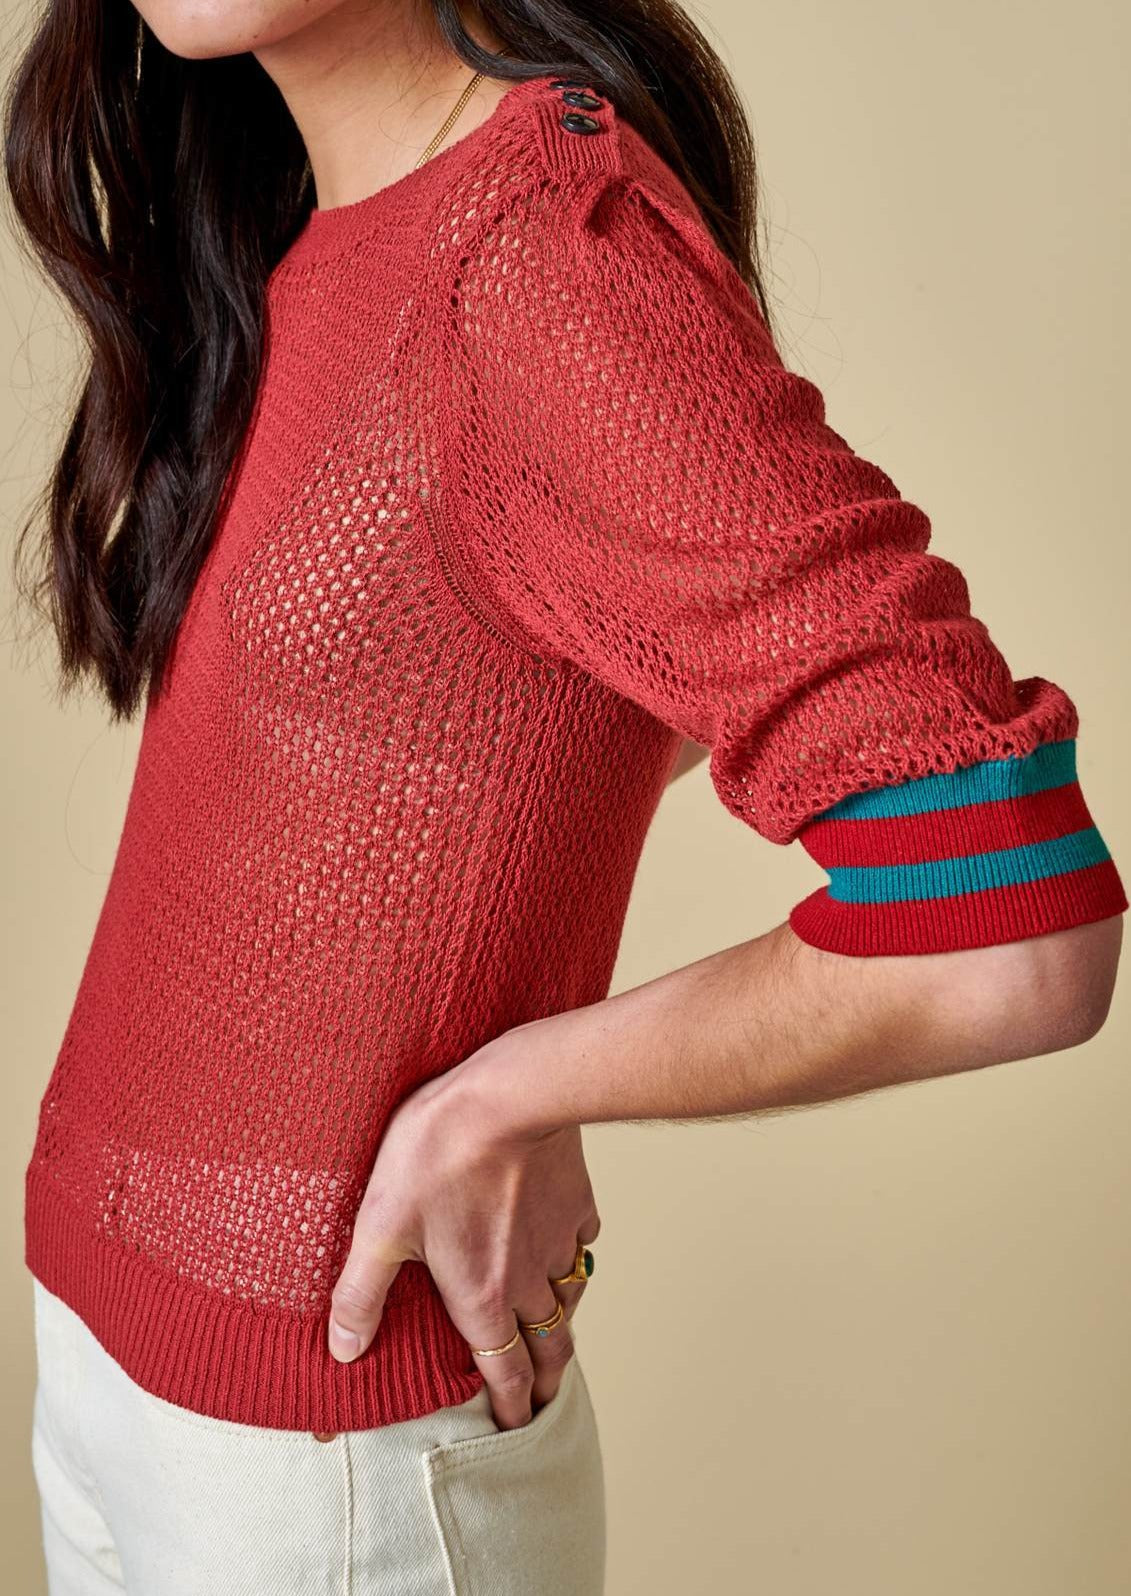 Bellerose - Dohy Sweater Tee: Red Dahlia - ouimillie